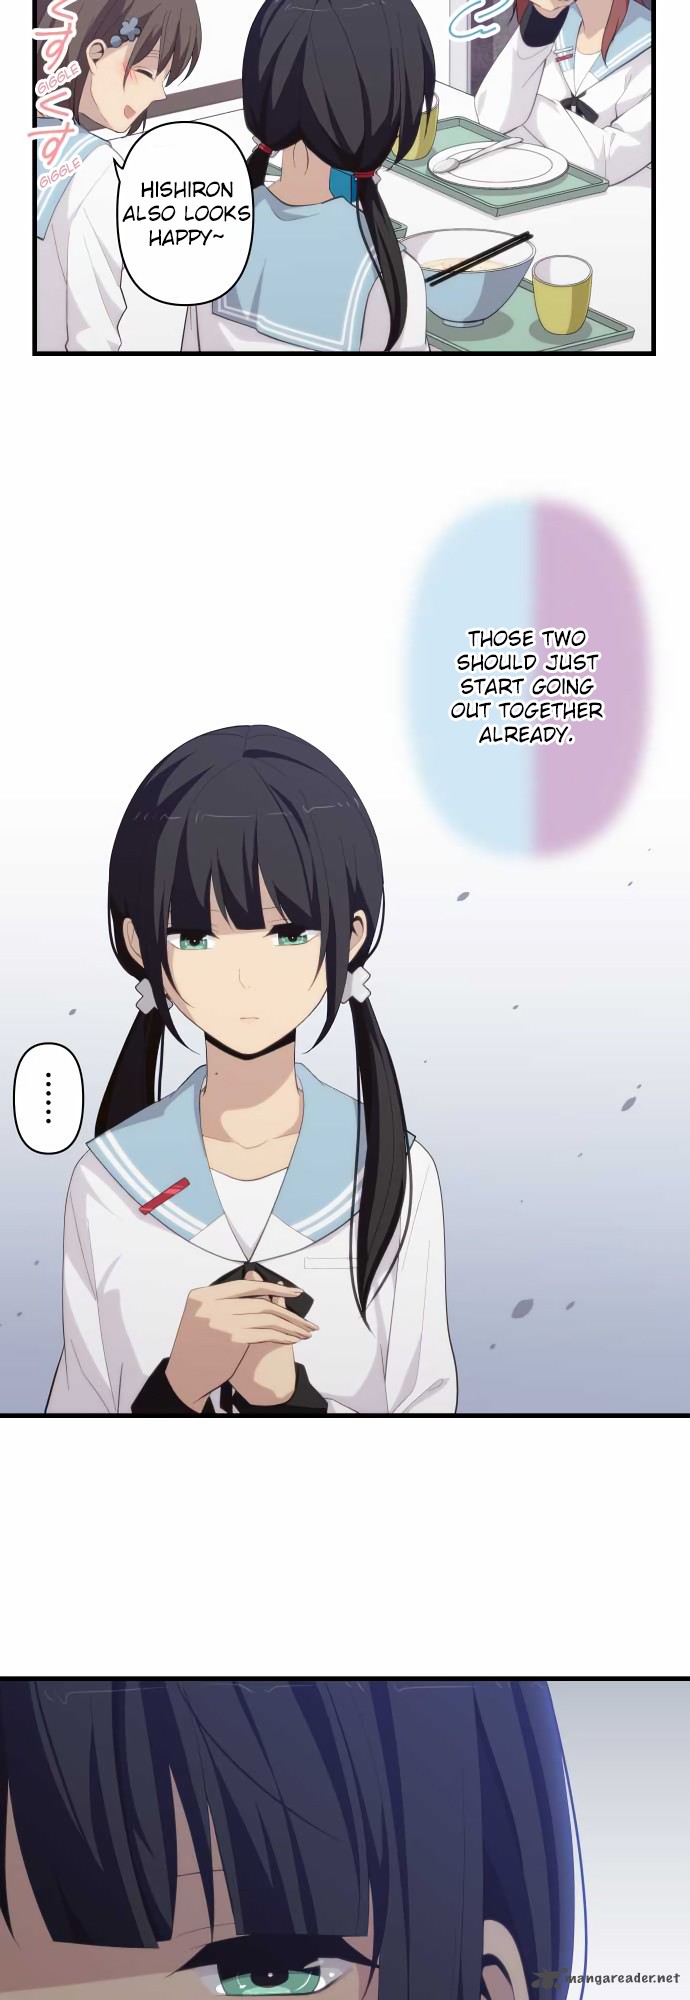 Relife 178 9